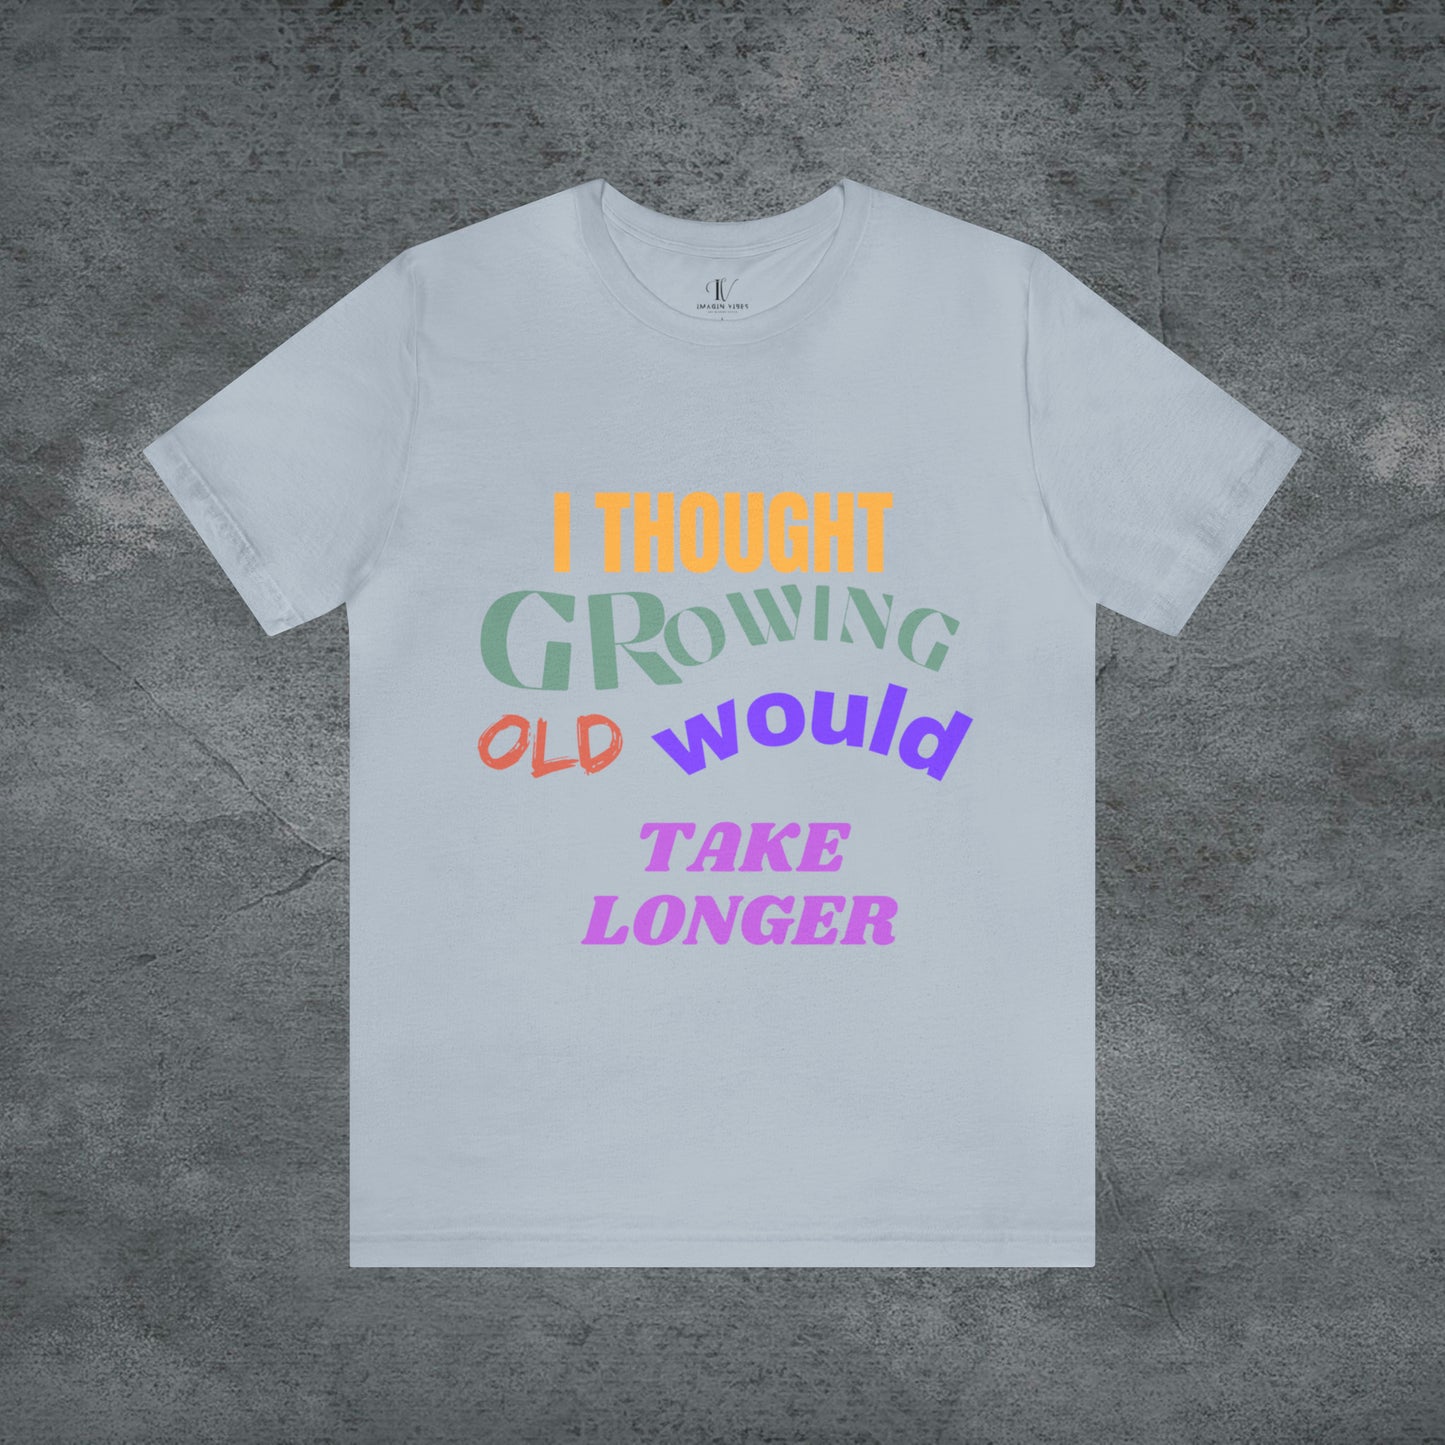 I Thought Growing Old Would Take Longer T-Shirt - Getting Older T-Shirt - Funny Adulting Tee - Old Age T-Shirt - Old Person T-Shirt T-Shirt Light Blue S 